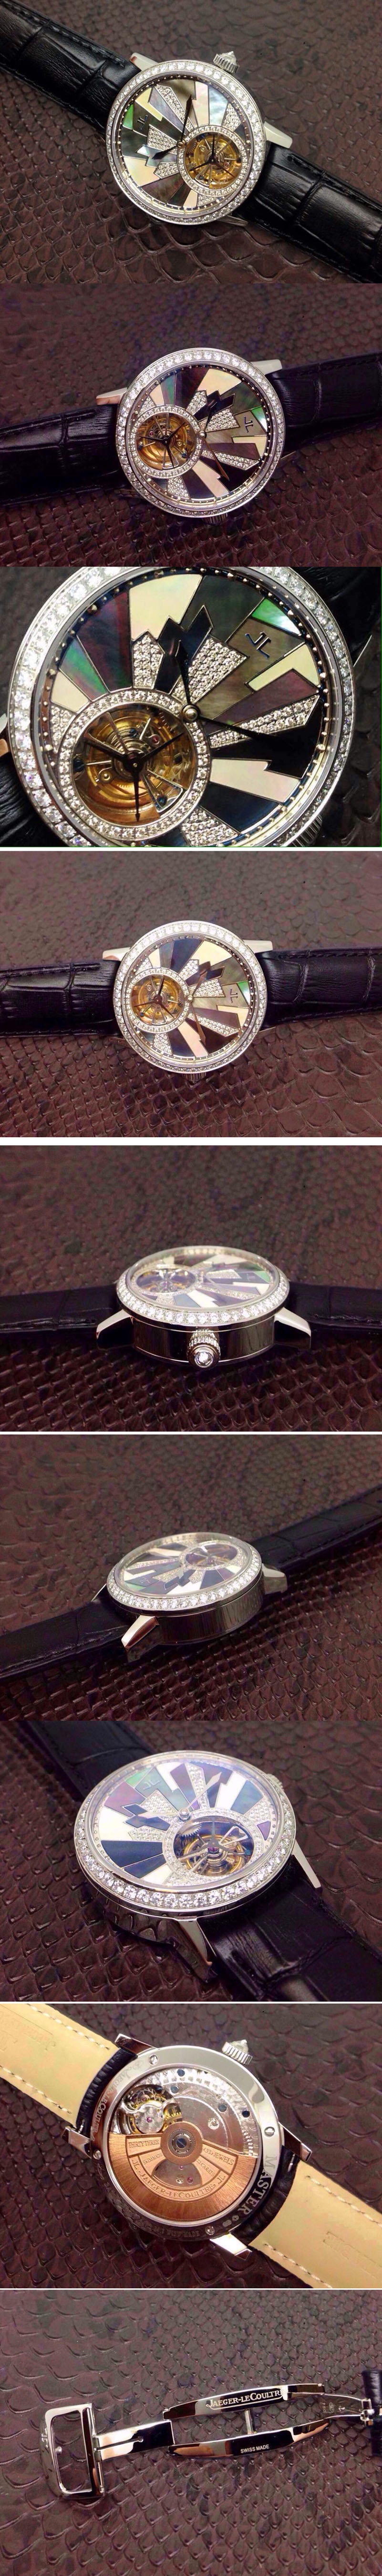 Replica Jaeger-LeCoultre Watches